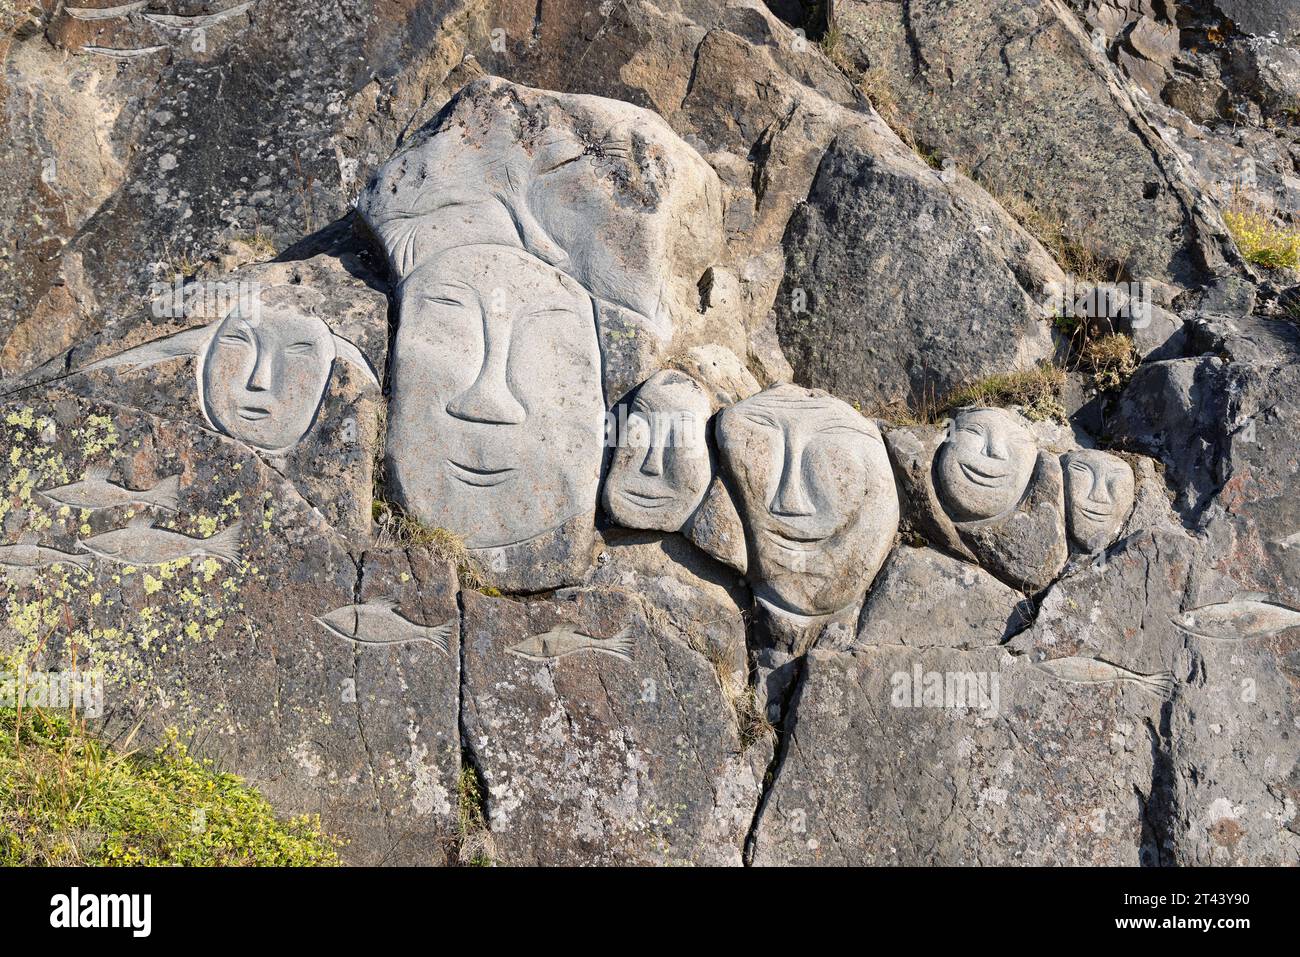 Traditional inuit sculpture; Stone faces, part of the outdoor 'Stone and man' open air gallery of stone sculptures, Qaqortoq, Greenland Arctic Stock Photo